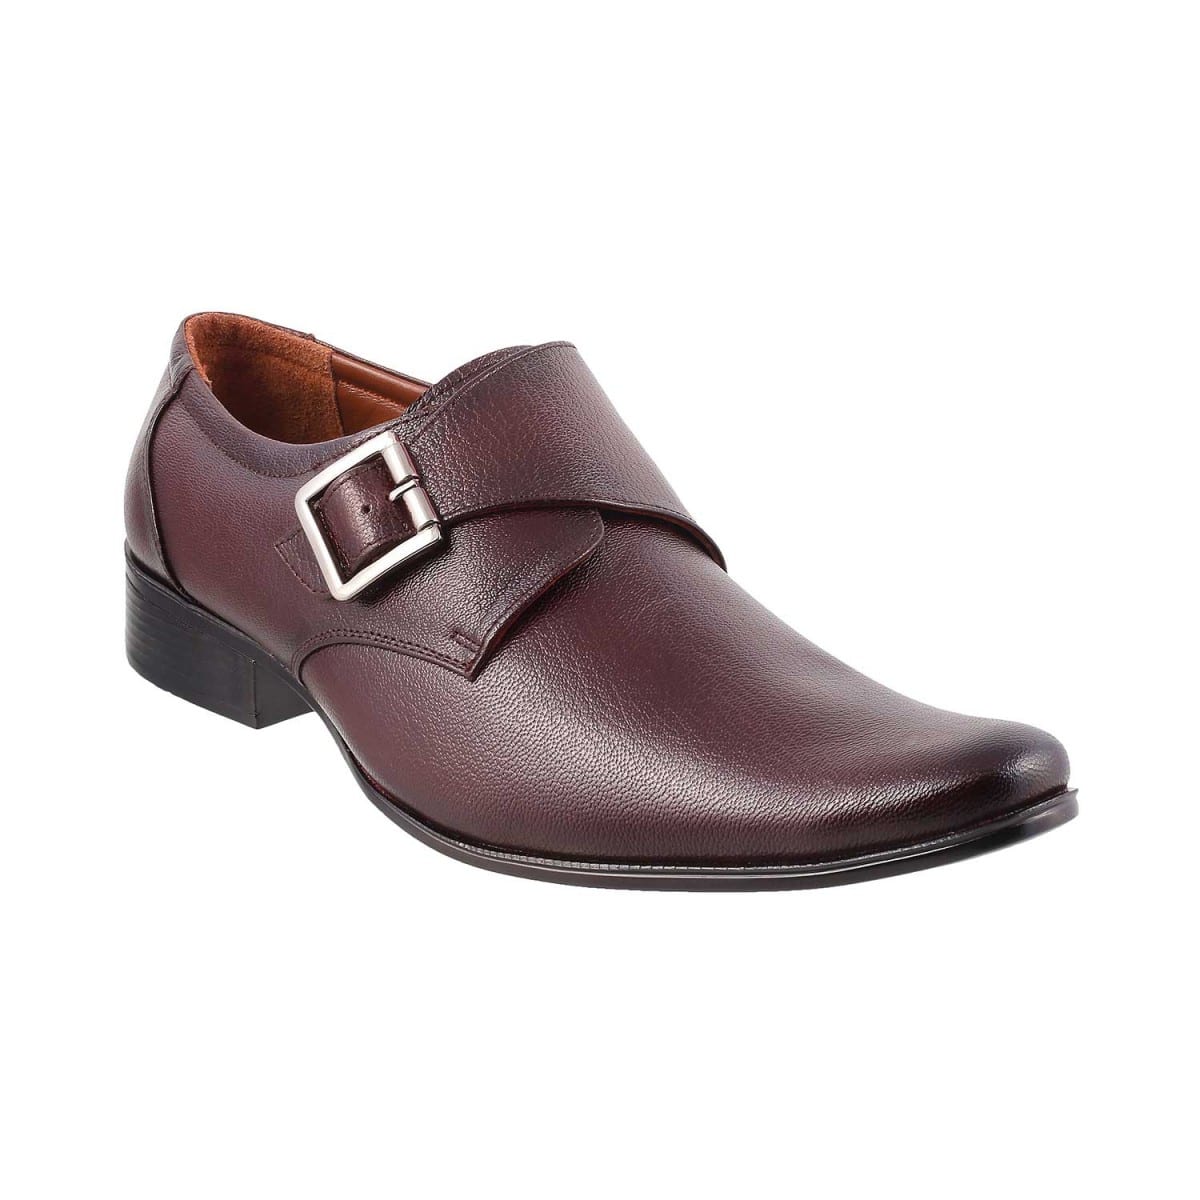 monk strap shoes for men by metro shoes